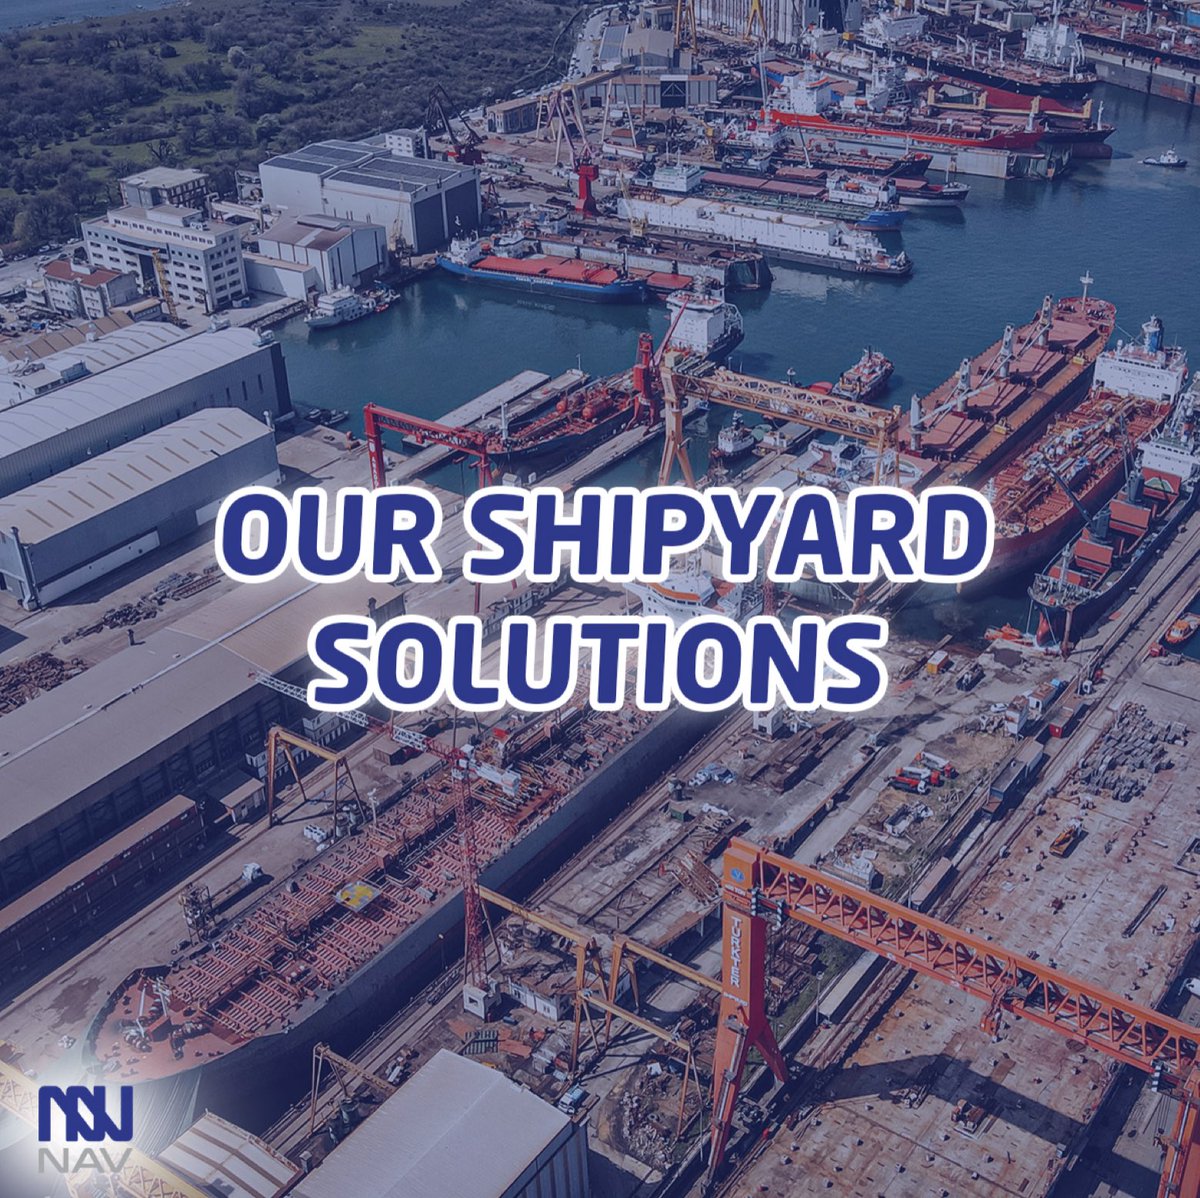 Our clients and partners will profit from our hands-on approach of the required technologies and operations, but also can place their trust in a company that is an integral part of the heritage of Newport Shipping. #navarchng #newportshipping #shipyard  #LNG #retrofit #vessel